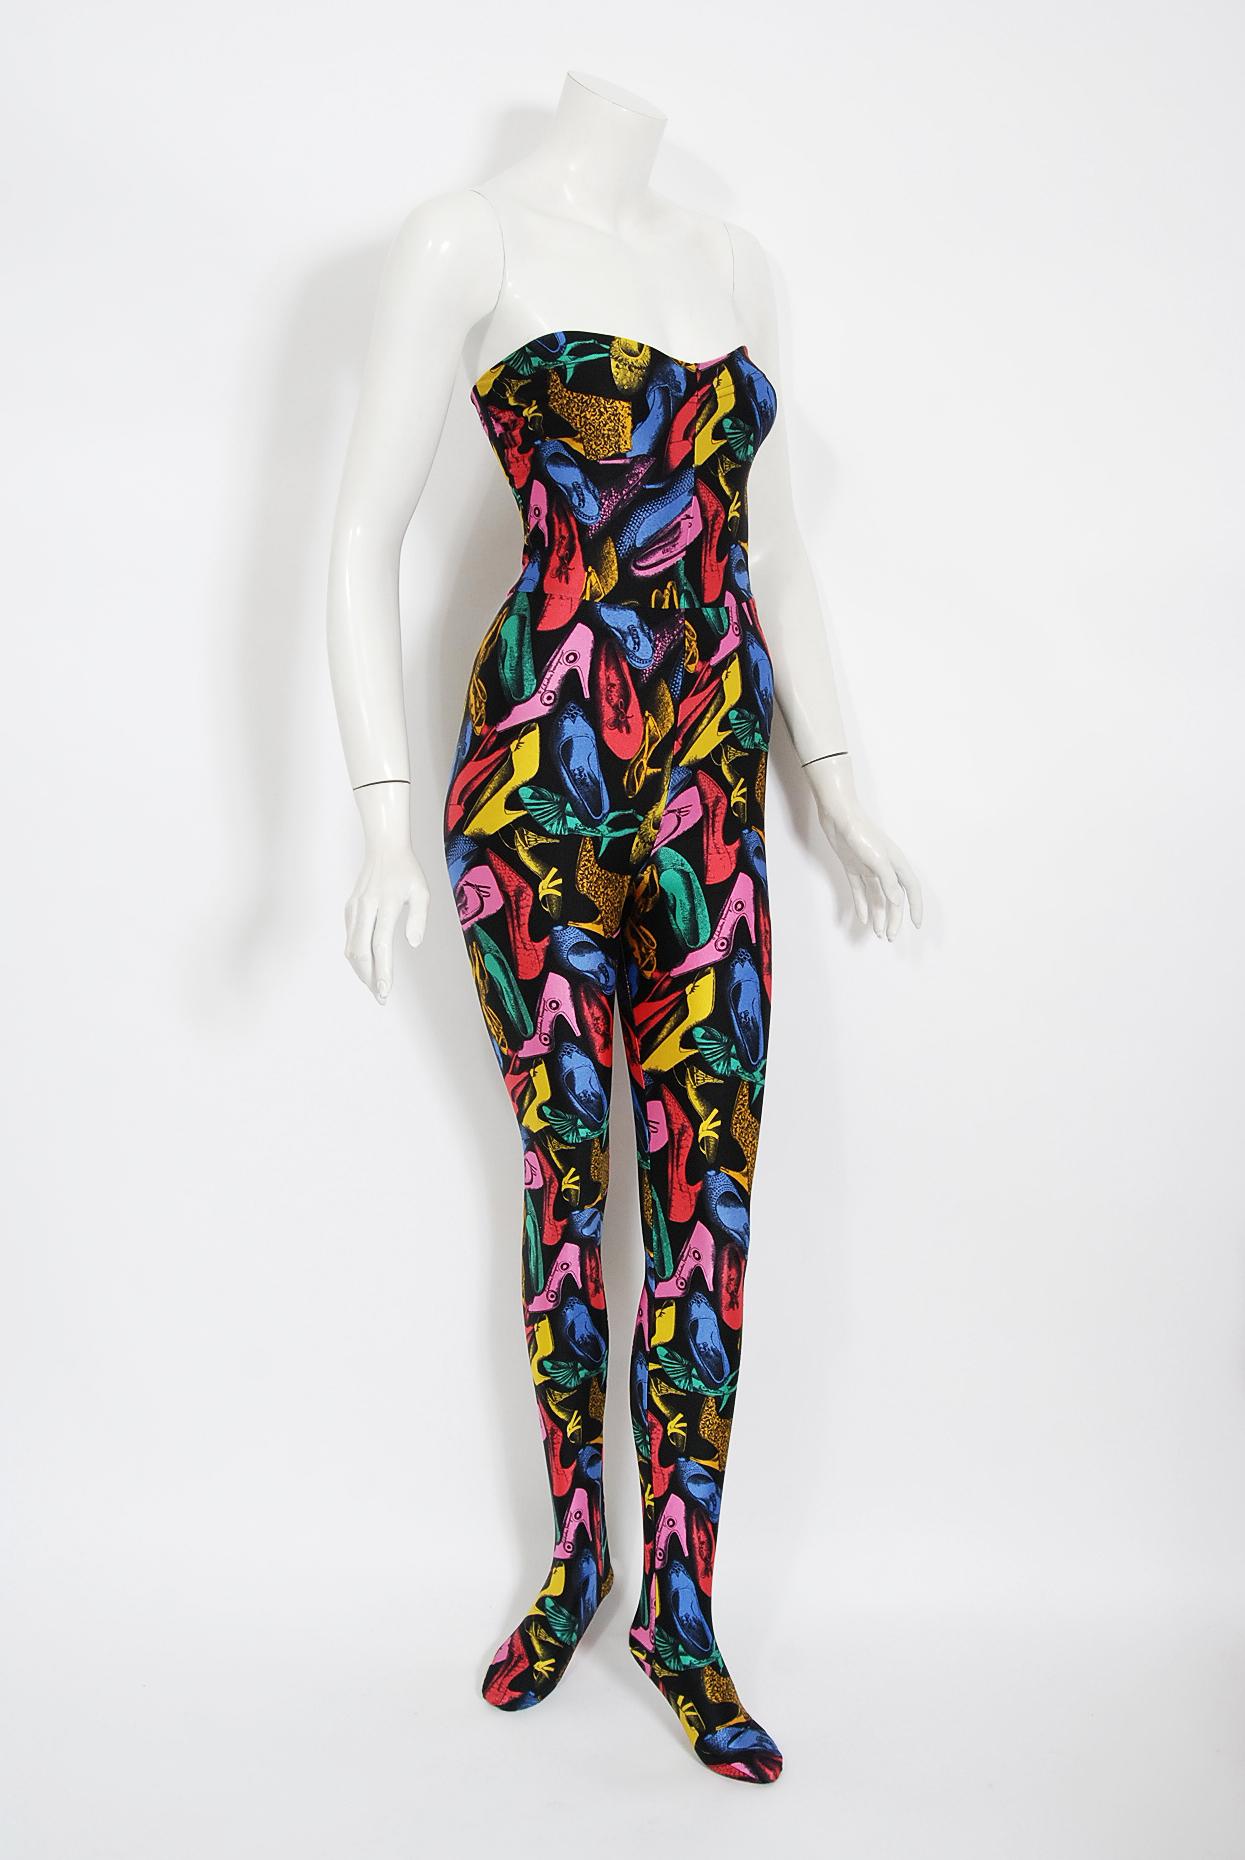 A rare and super sexy Salvatore Ferragamo designer colorful high-heel shoe print catsuit from his spring-summer 1991 collection. Supermodel Linda Evangelista famously walked the runway in the identical piece. The stretch lycra jumpsuit features a